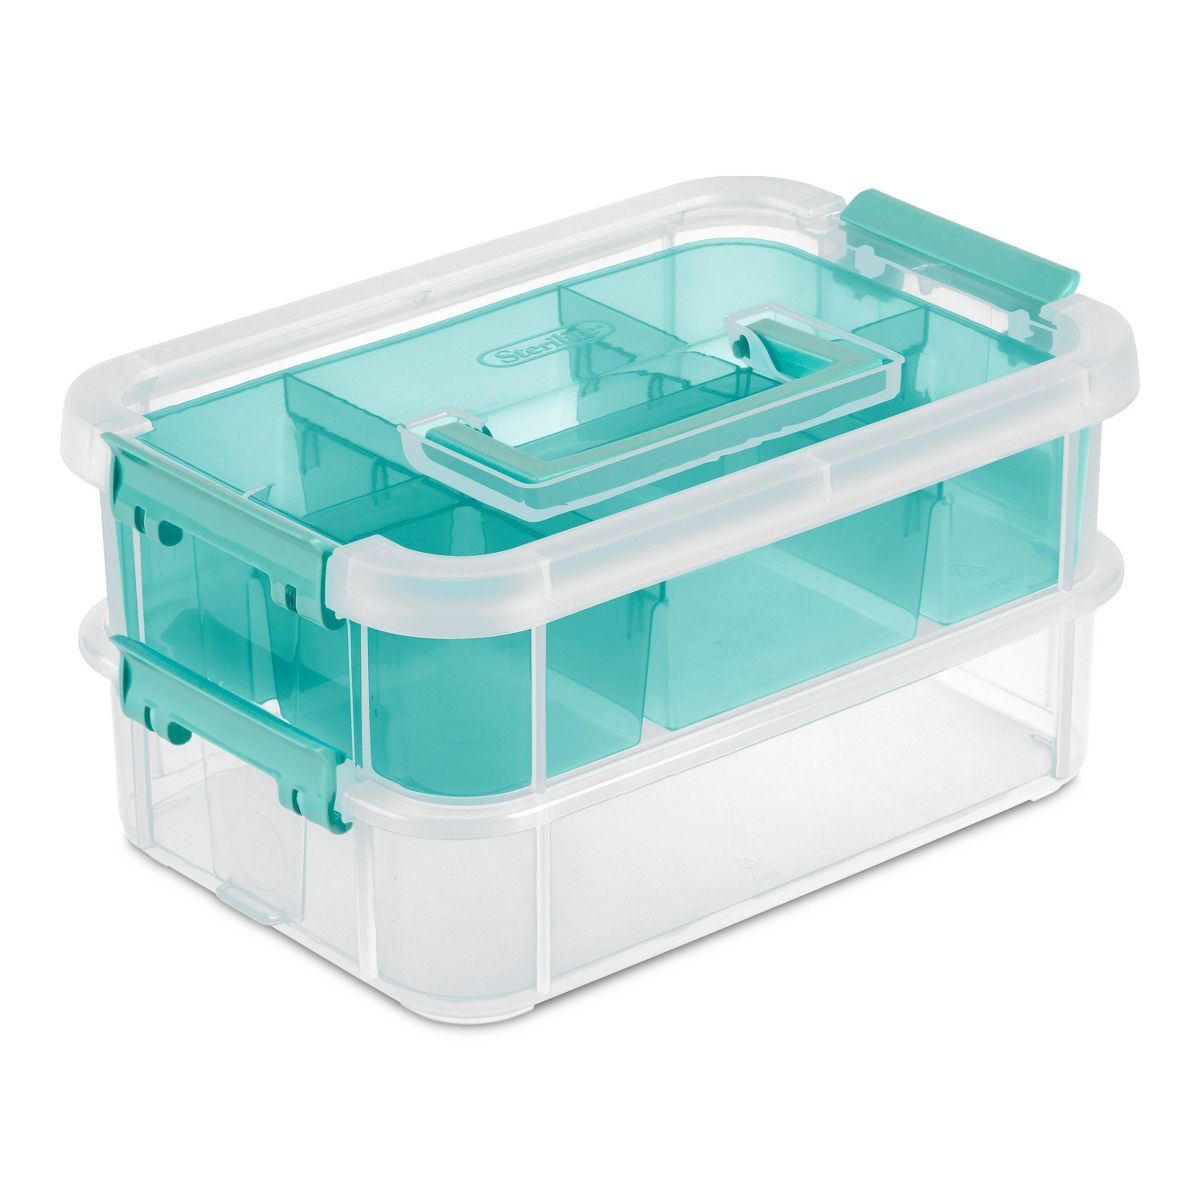 Sterilite Stack & Carry 2 Tray Handle Box Organizer | Target